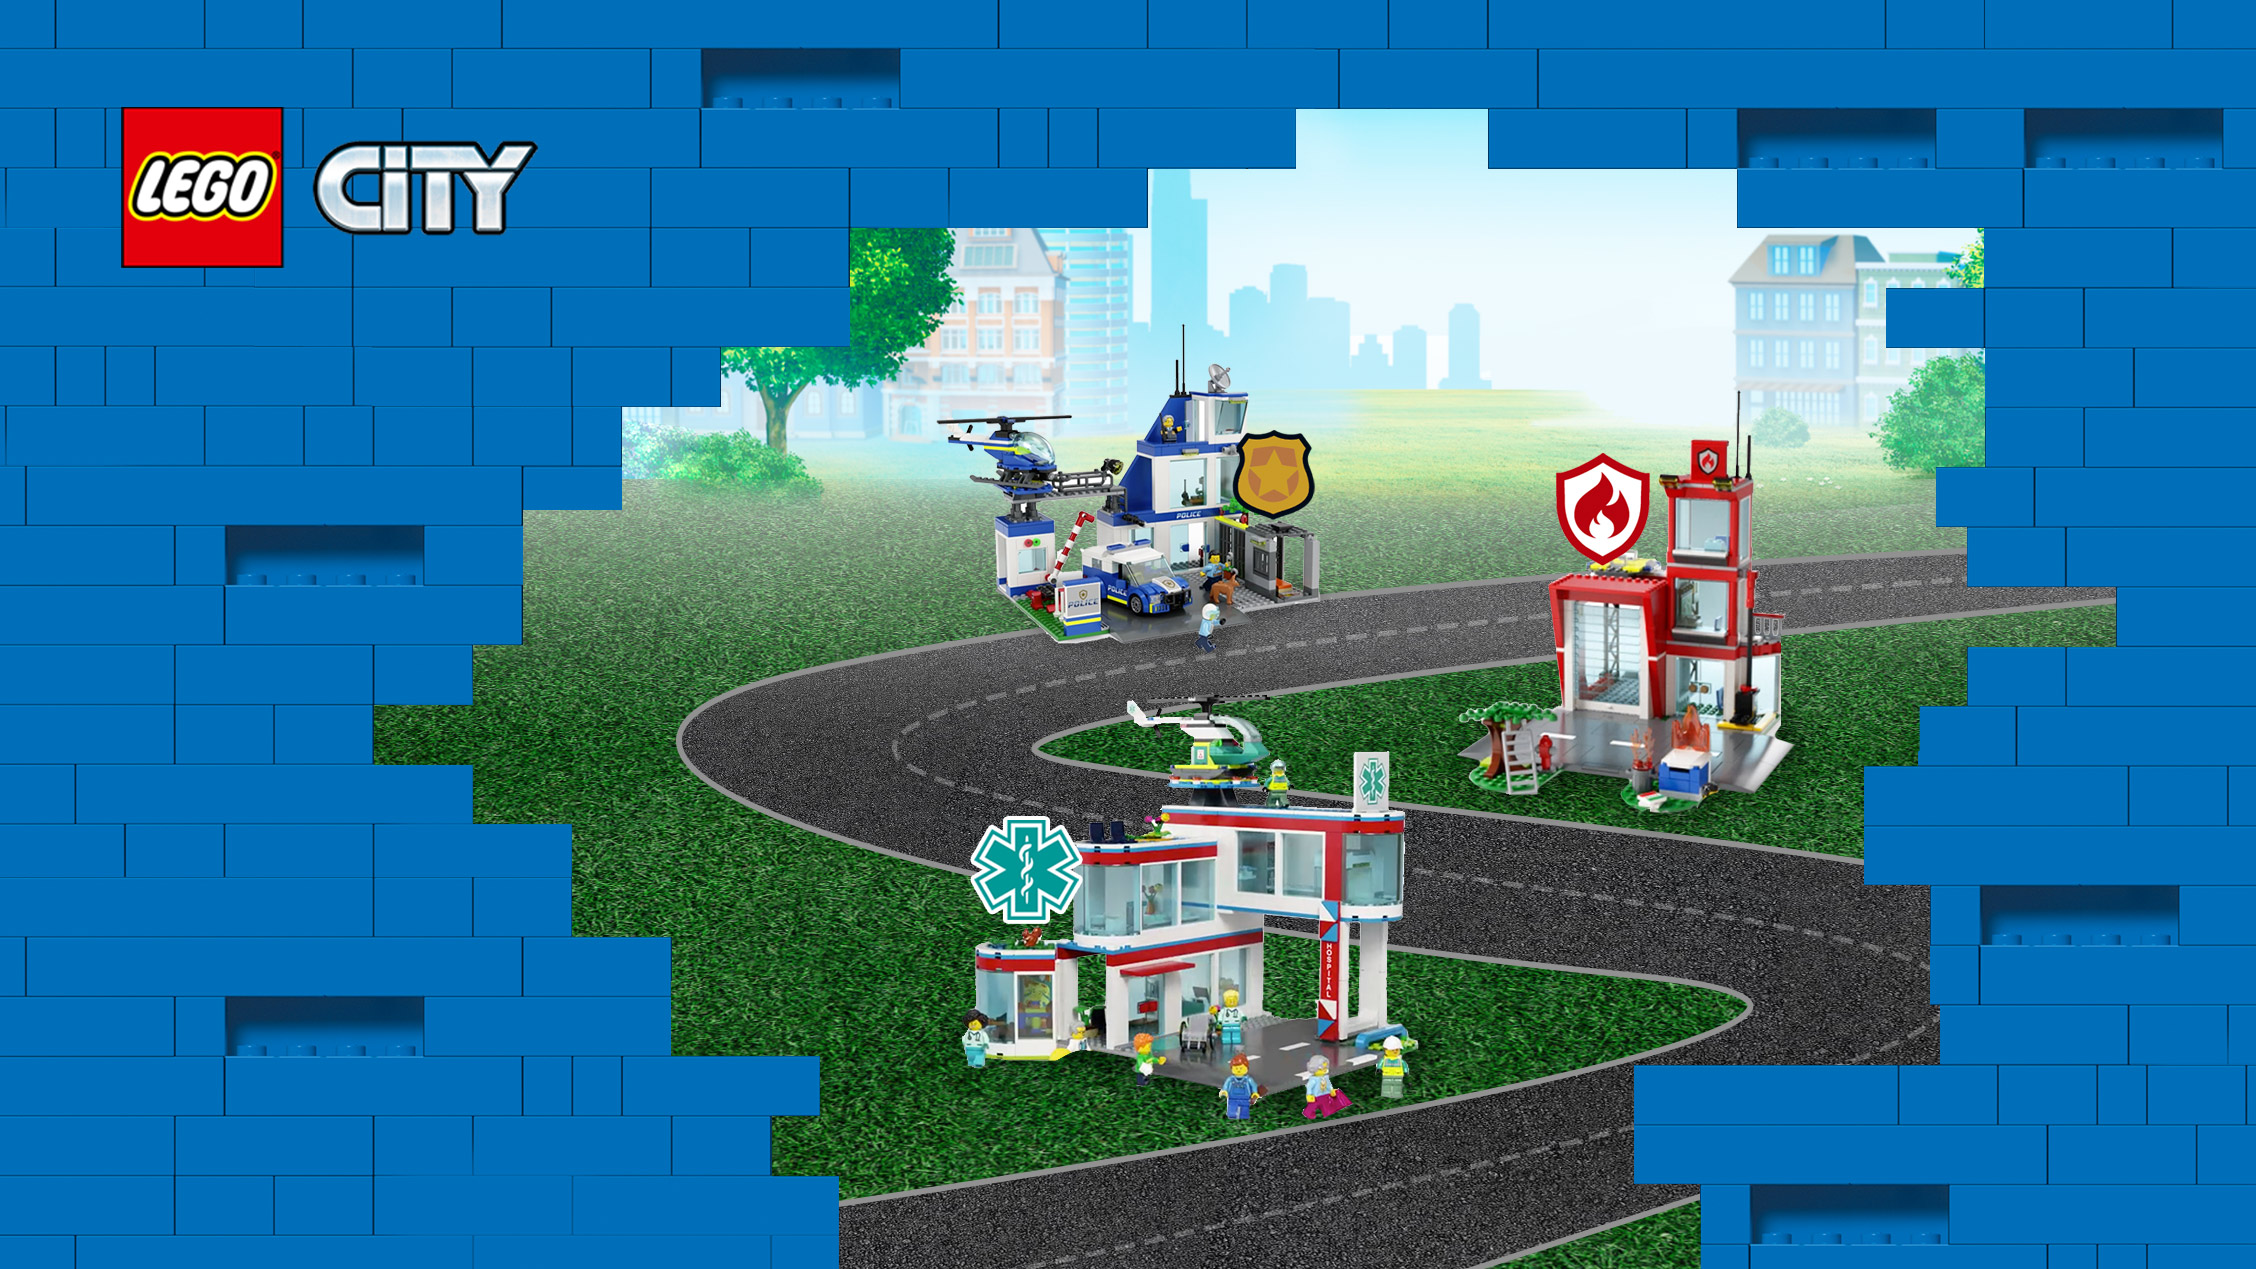 prototype lade sovende LEGO City – Let's make awesome - LEGO® City Games - LEGO.com for kids